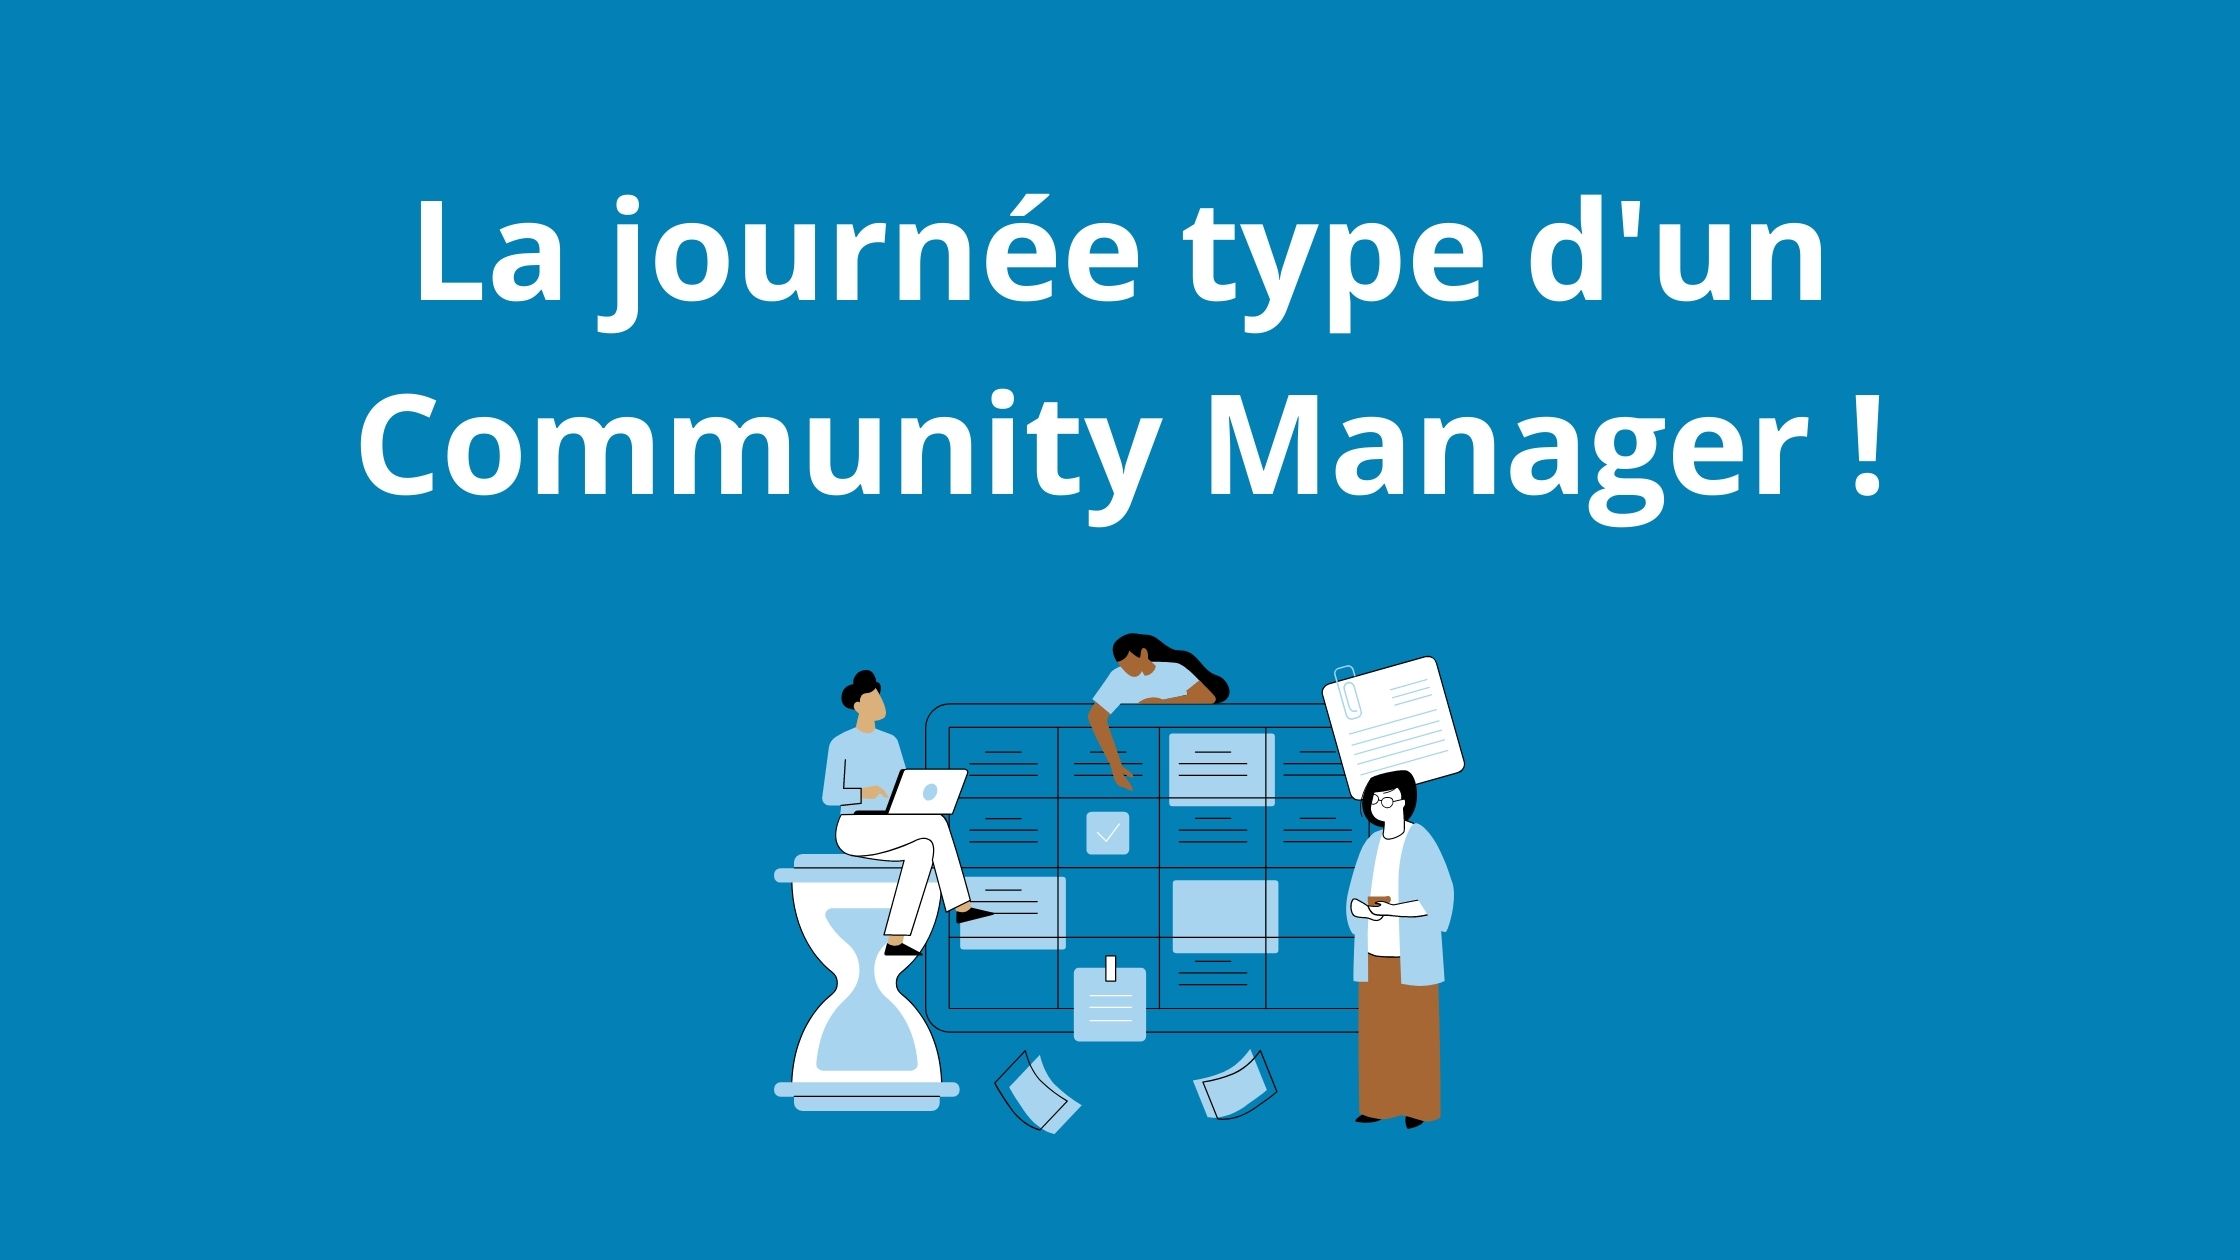 You are currently viewing La journée type d’un Community Manager